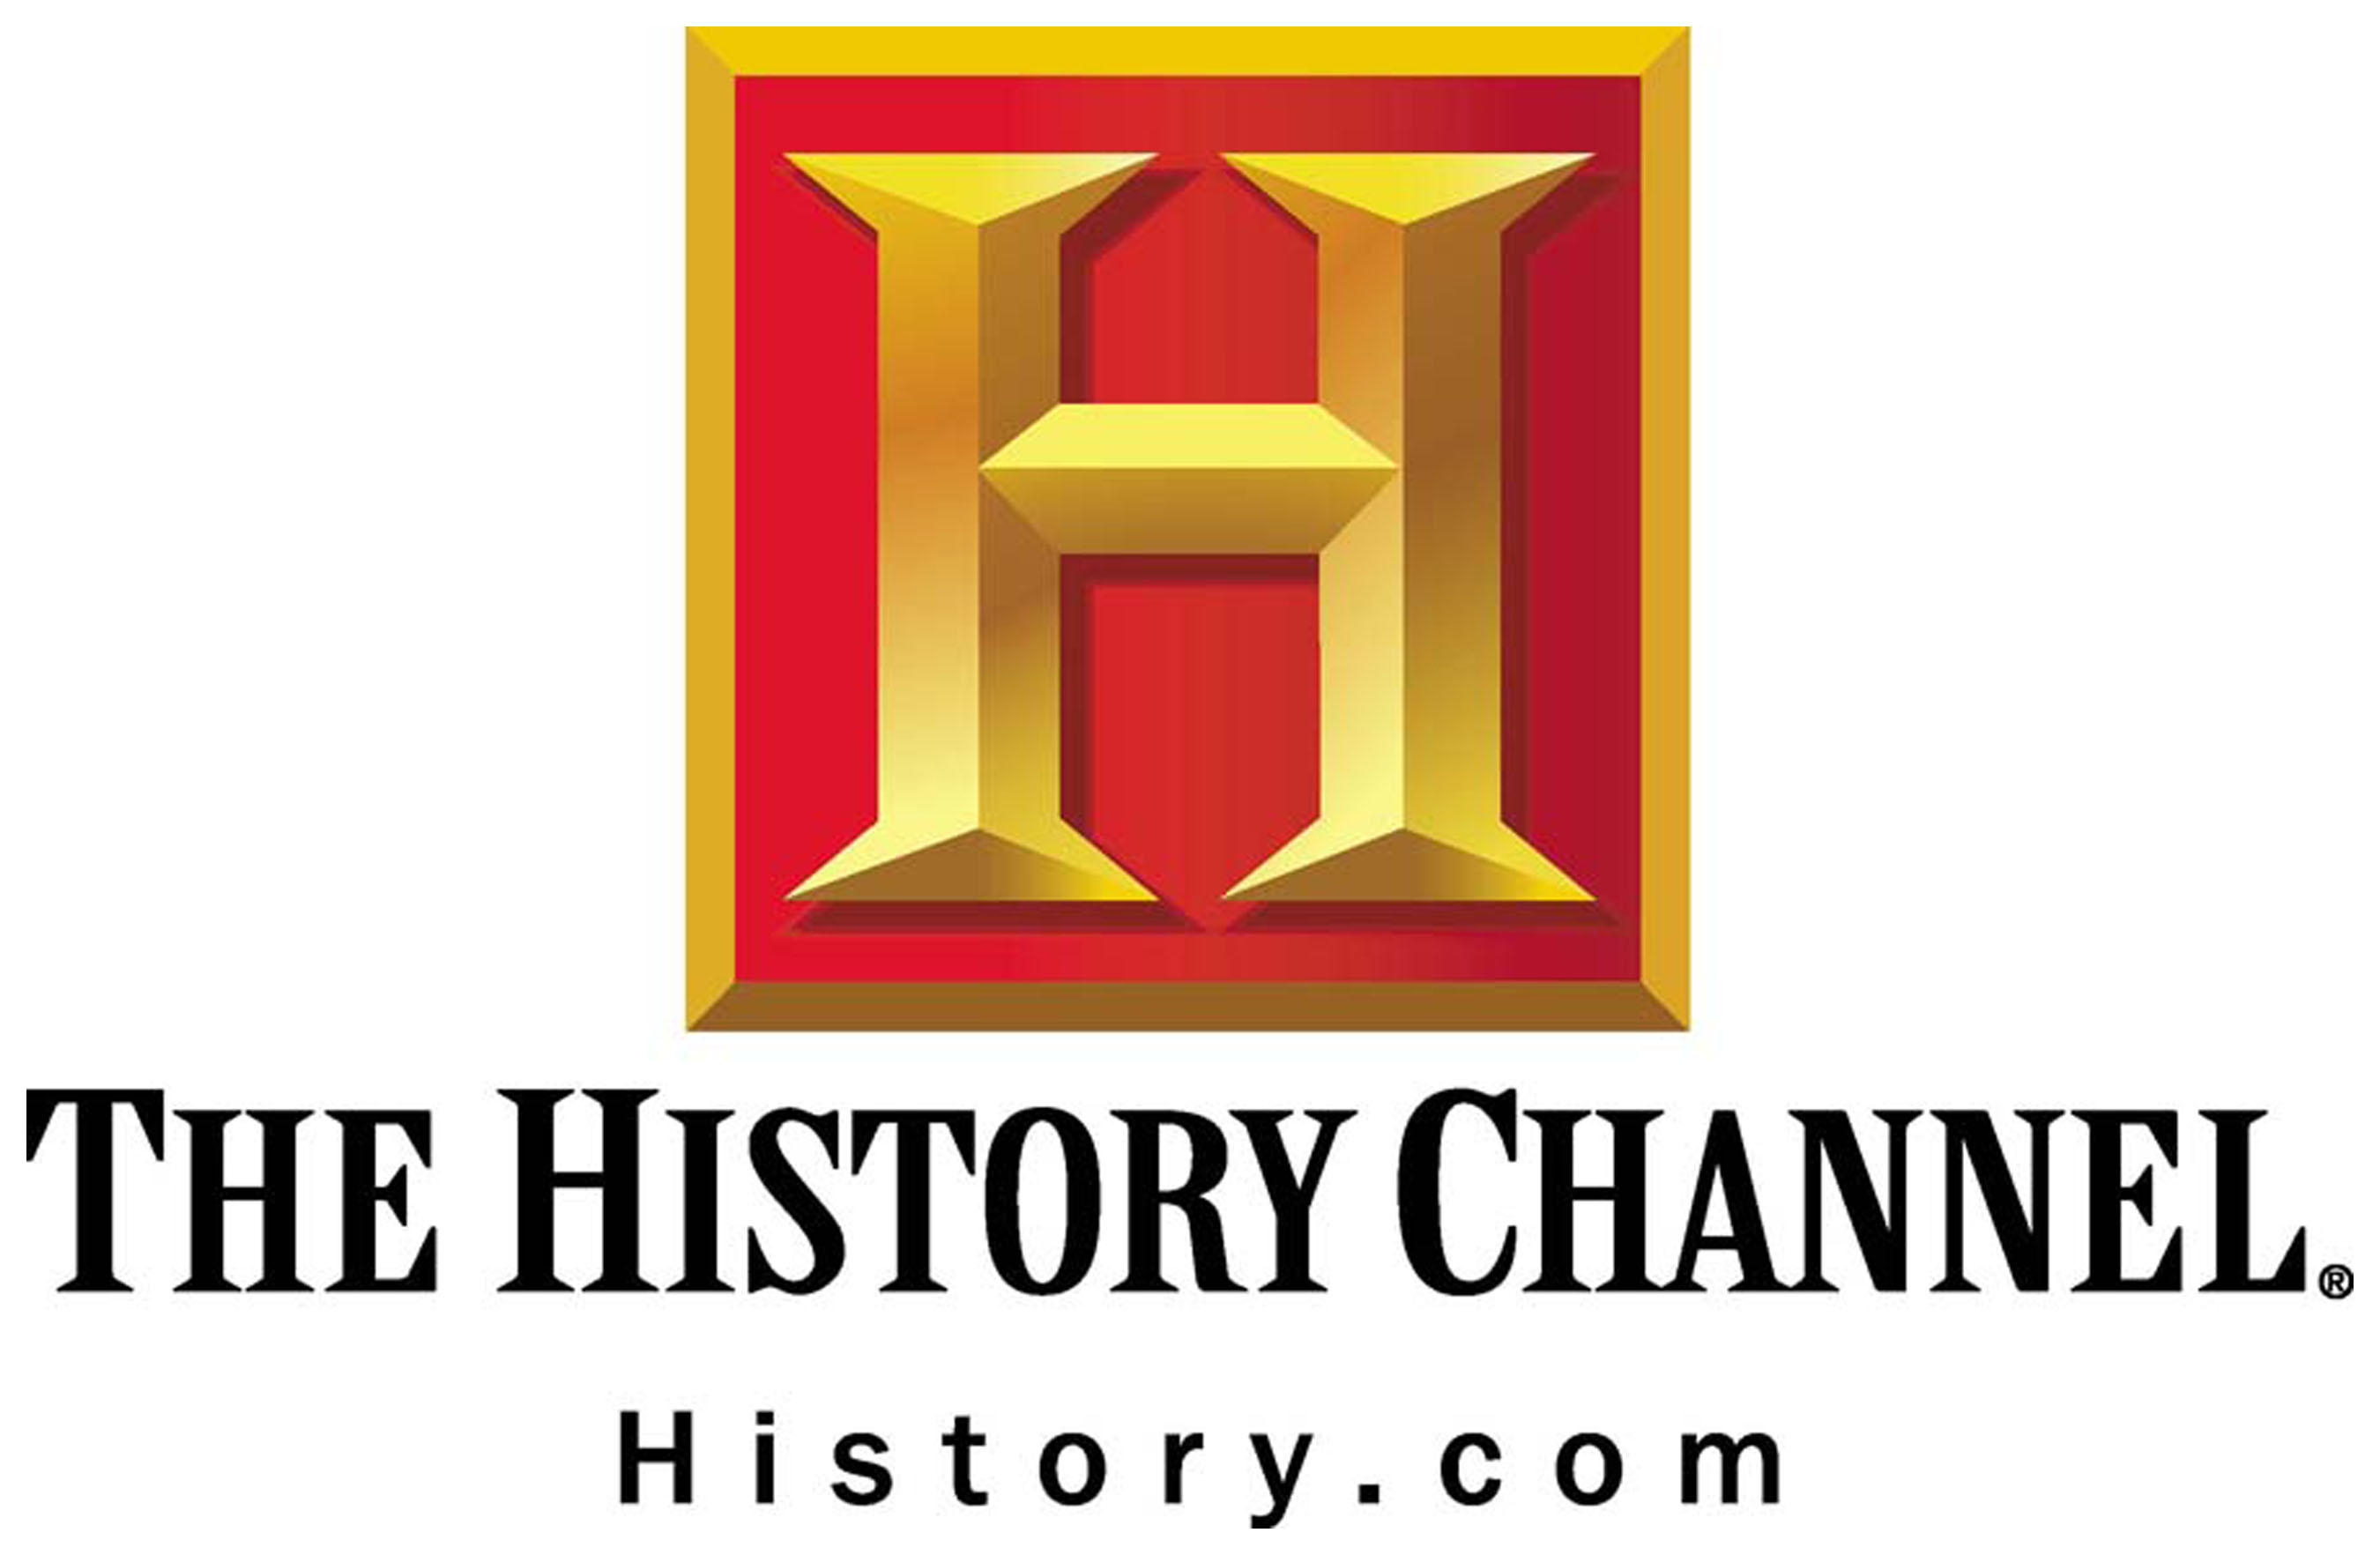 history-channel-prnphotos049936-the-history-channel.jpg